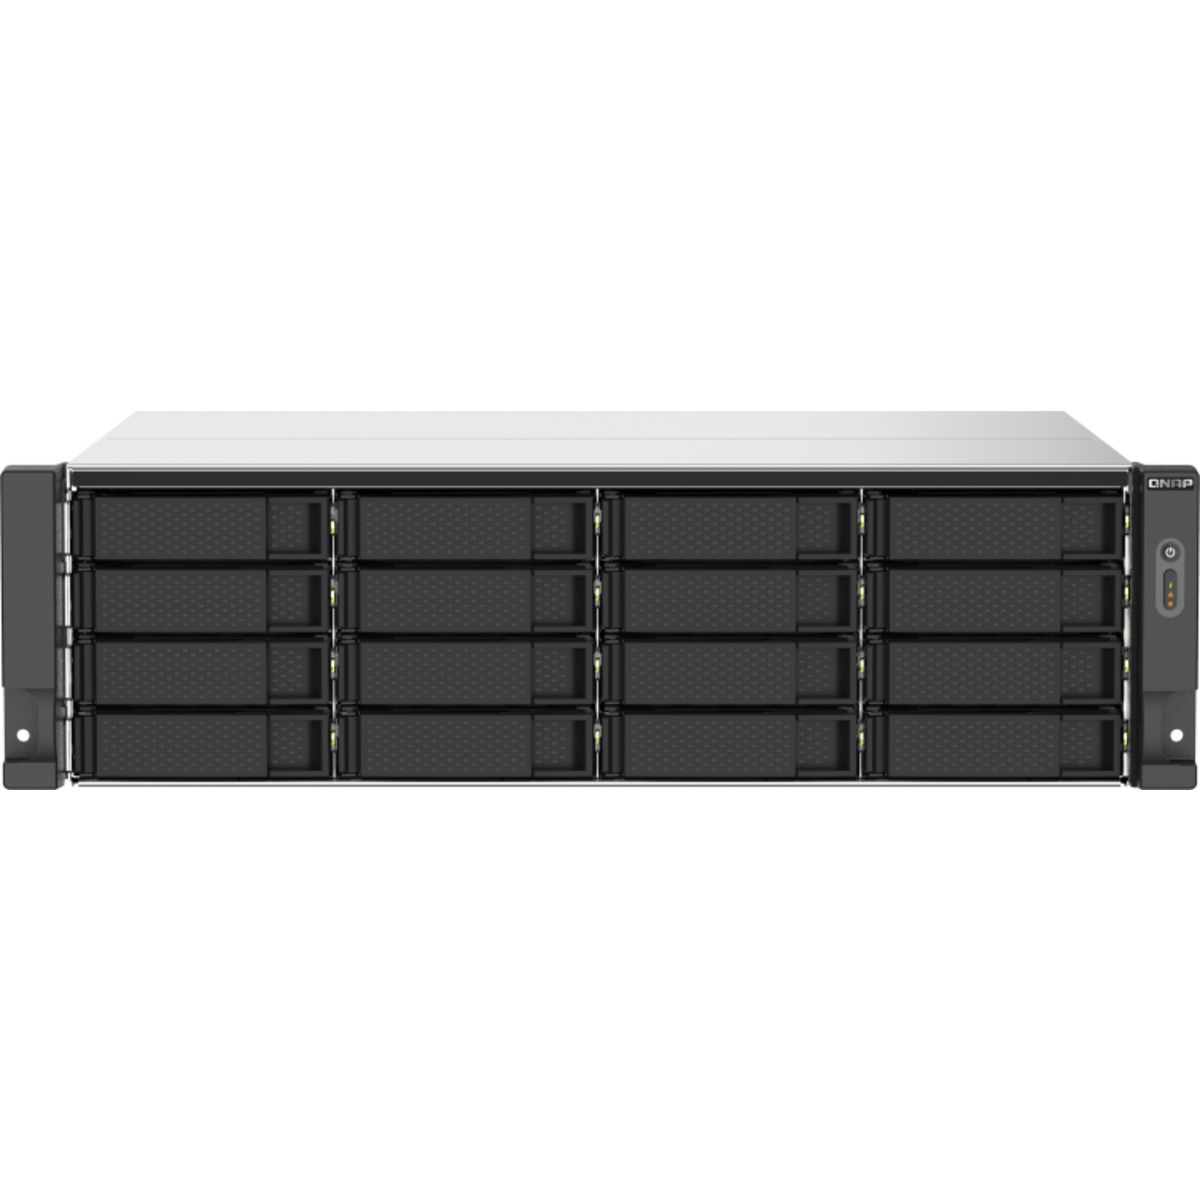 QNAP TS-1673AU-RP 192tb 16-Bay RackMount Multimedia / Power User / Business NAS - Network Attached Storage Device 16x12tb Western Digital Gold WD121KRYZ 3.5 7200rpm SATA 6Gb/s HDD ENTERPRISE Class Drives Installed - Burn-In Tested - FREE RAM UPGRADE TS-1673AU-RP